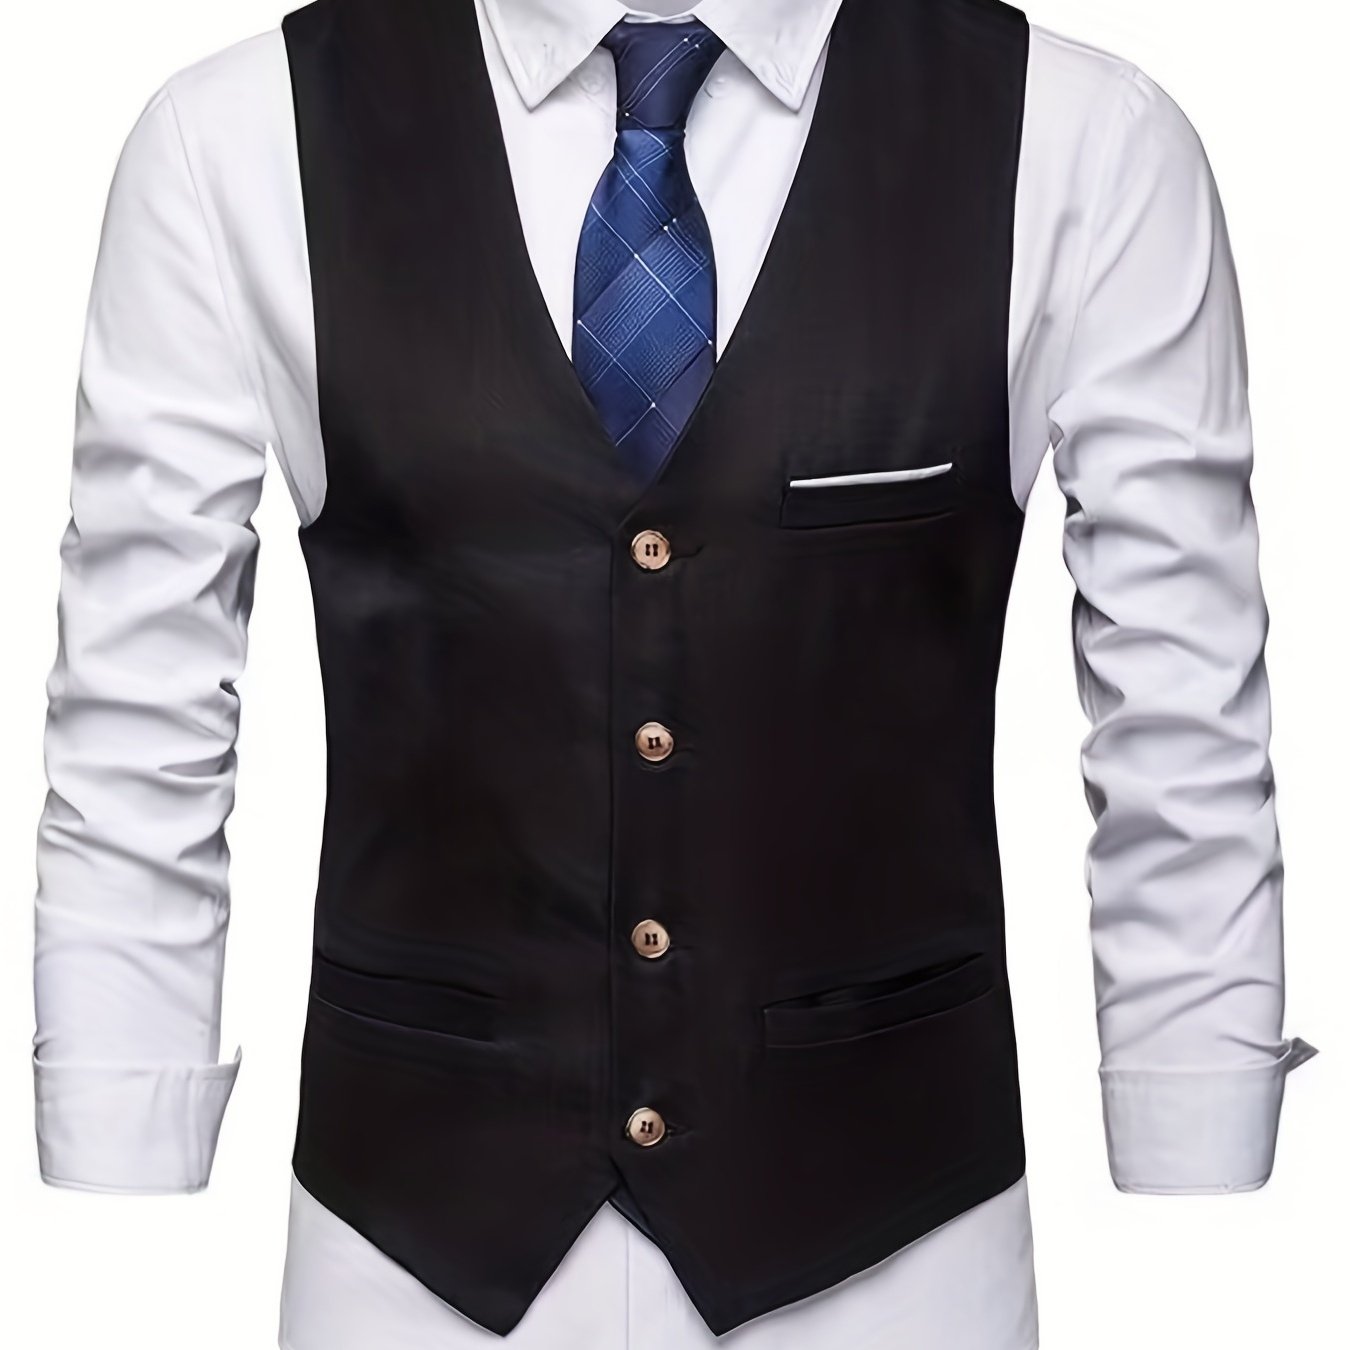 

V Neck Smart Suit Vest, Men's Casual Retro Style Solid Color Single Breasted Waistcoat For Dinner Suit Match